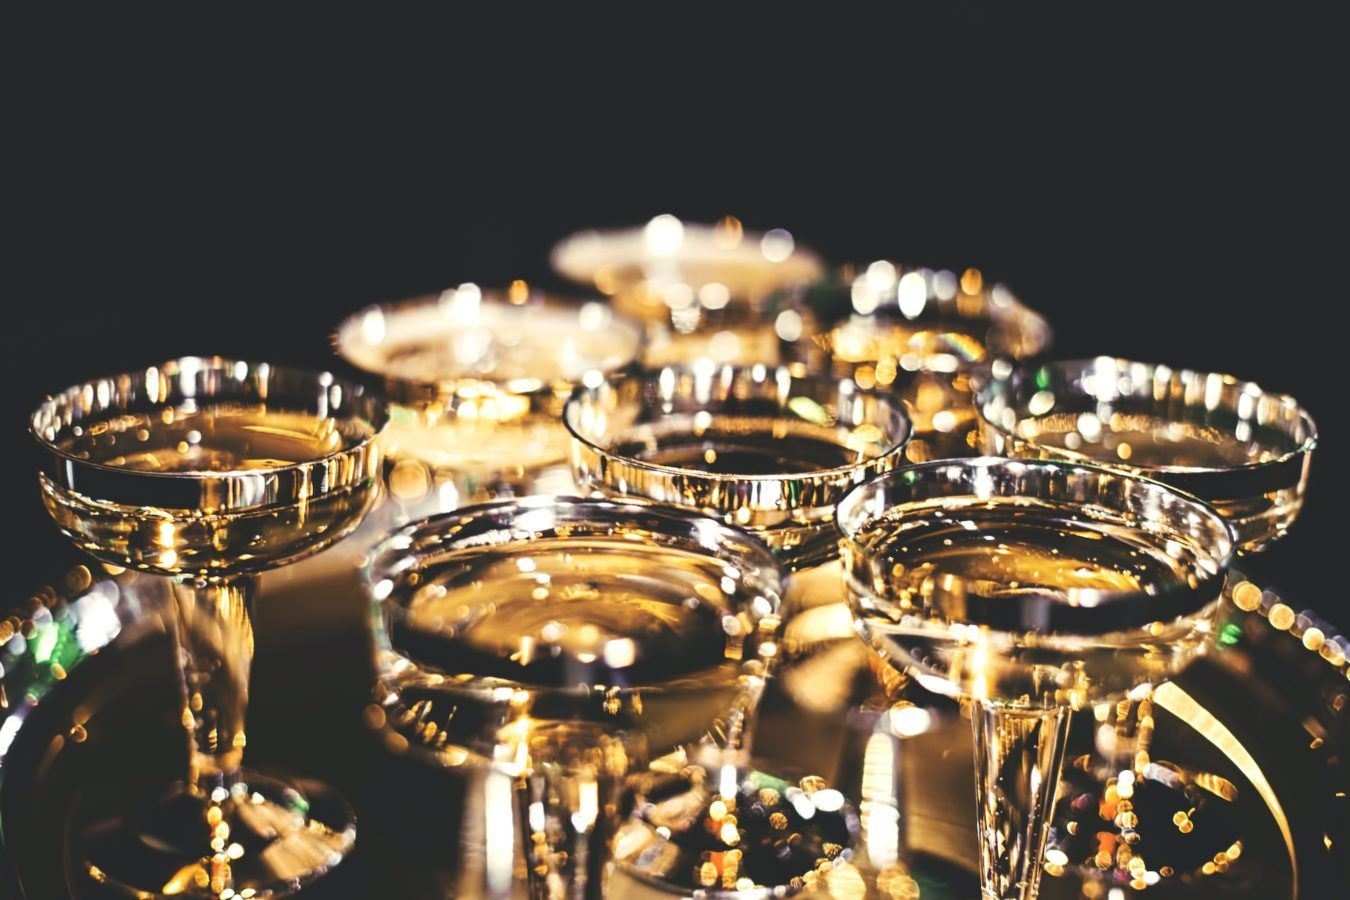 3 unexpected pairings for Champagne, according to a sommelier